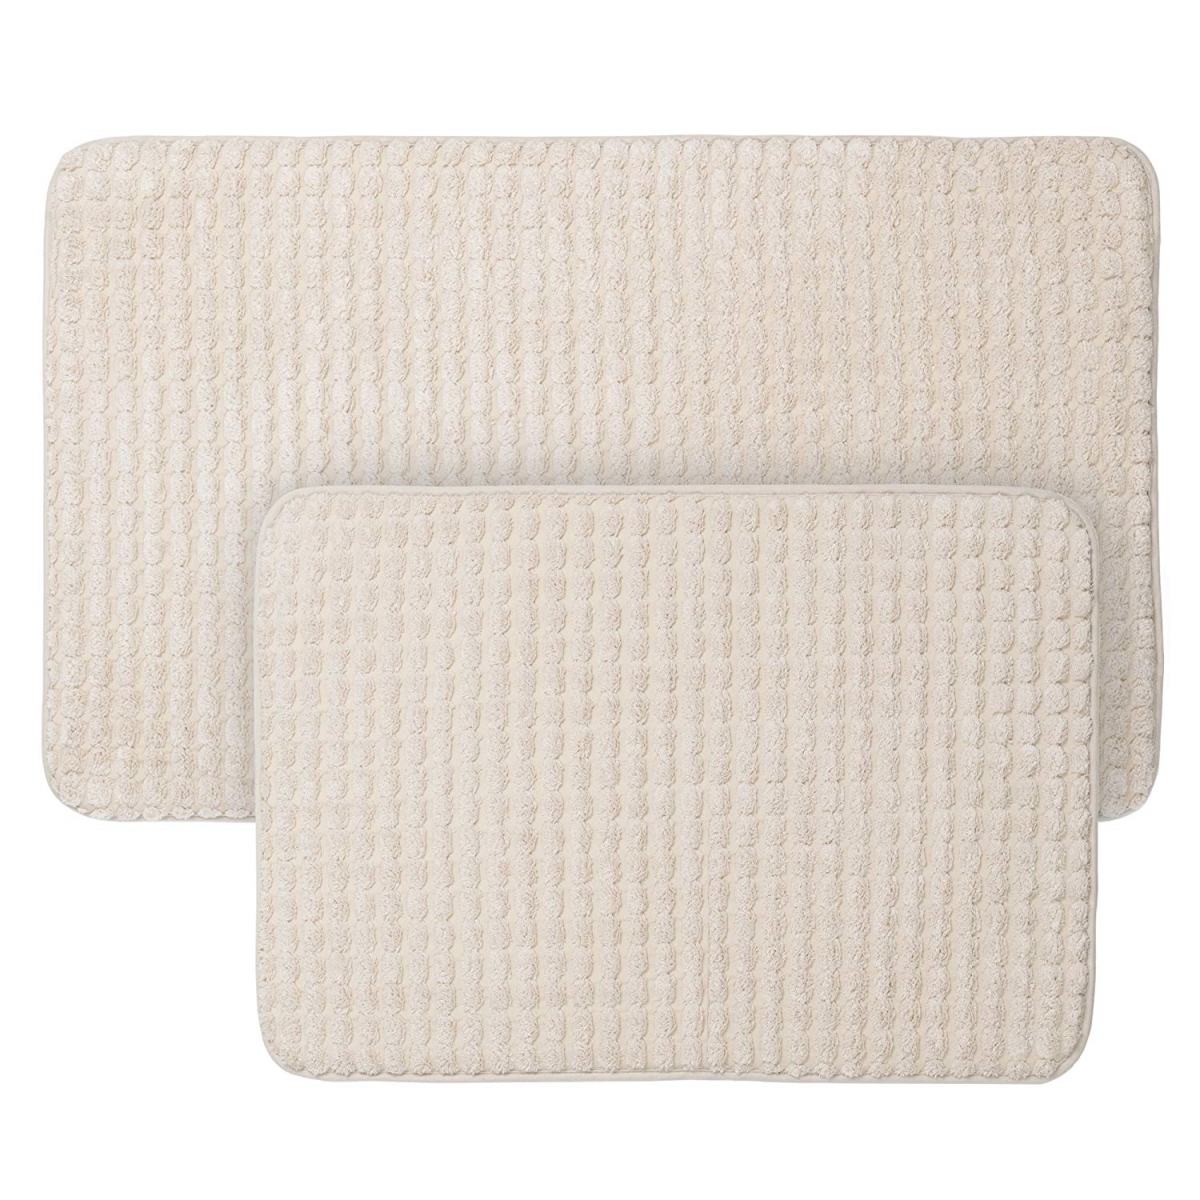 Picture of Bedford Home 67A-23338 2 Piece Memory Foam Bath Mat Set by Woven Jacquard Fleece - Ivory